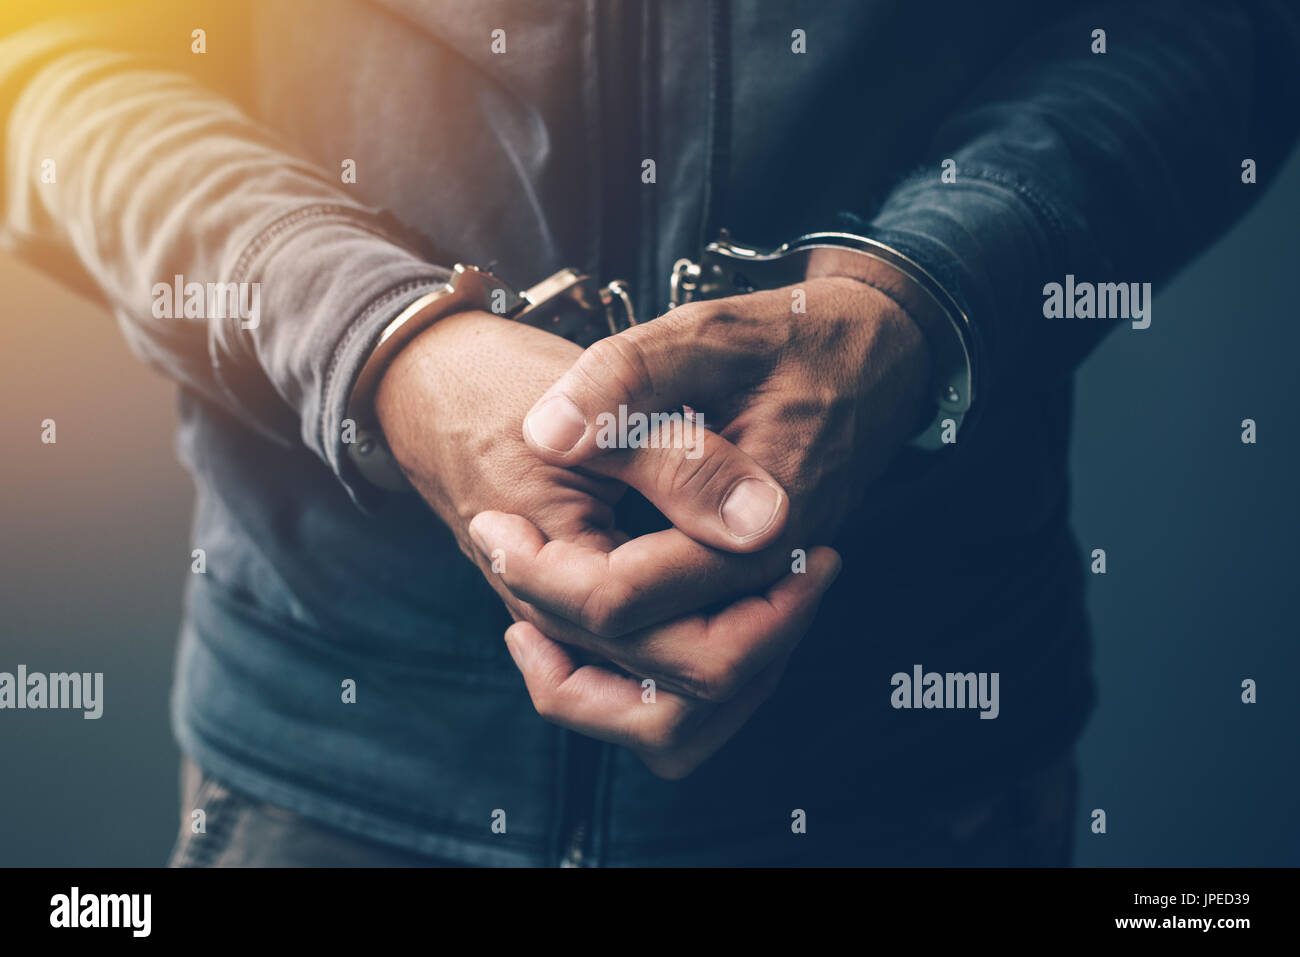 Arrested computer hacker and cyber criminal with handcuffs, close up of hands Stock Photo